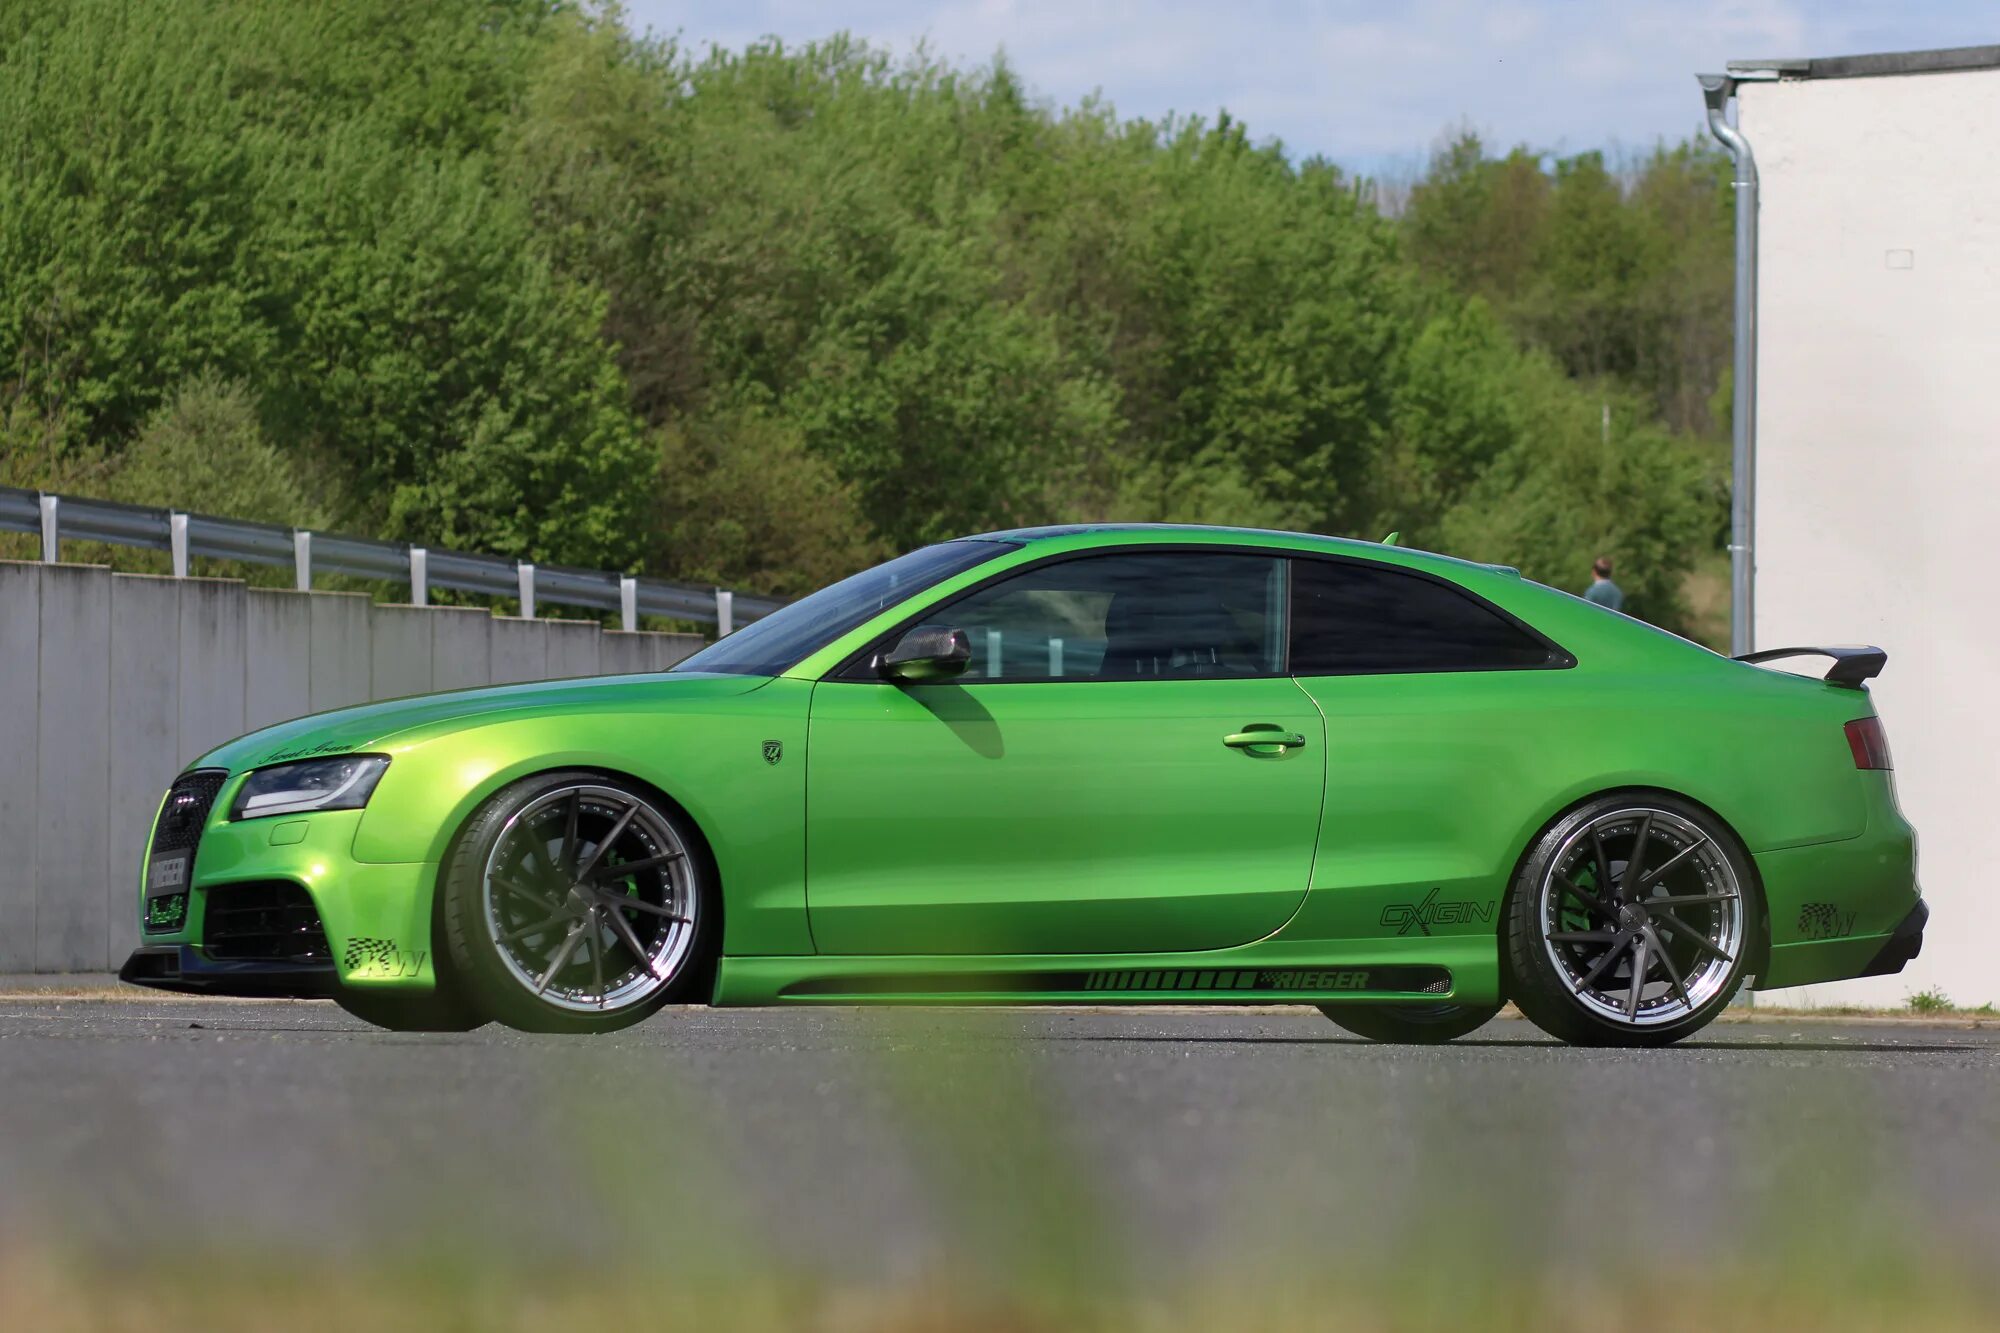 Audi a5 Tuning. Audi a5 Coupe Tuning. Ауди а5 купе зеленая. Audi a5 Coupe зеленая.